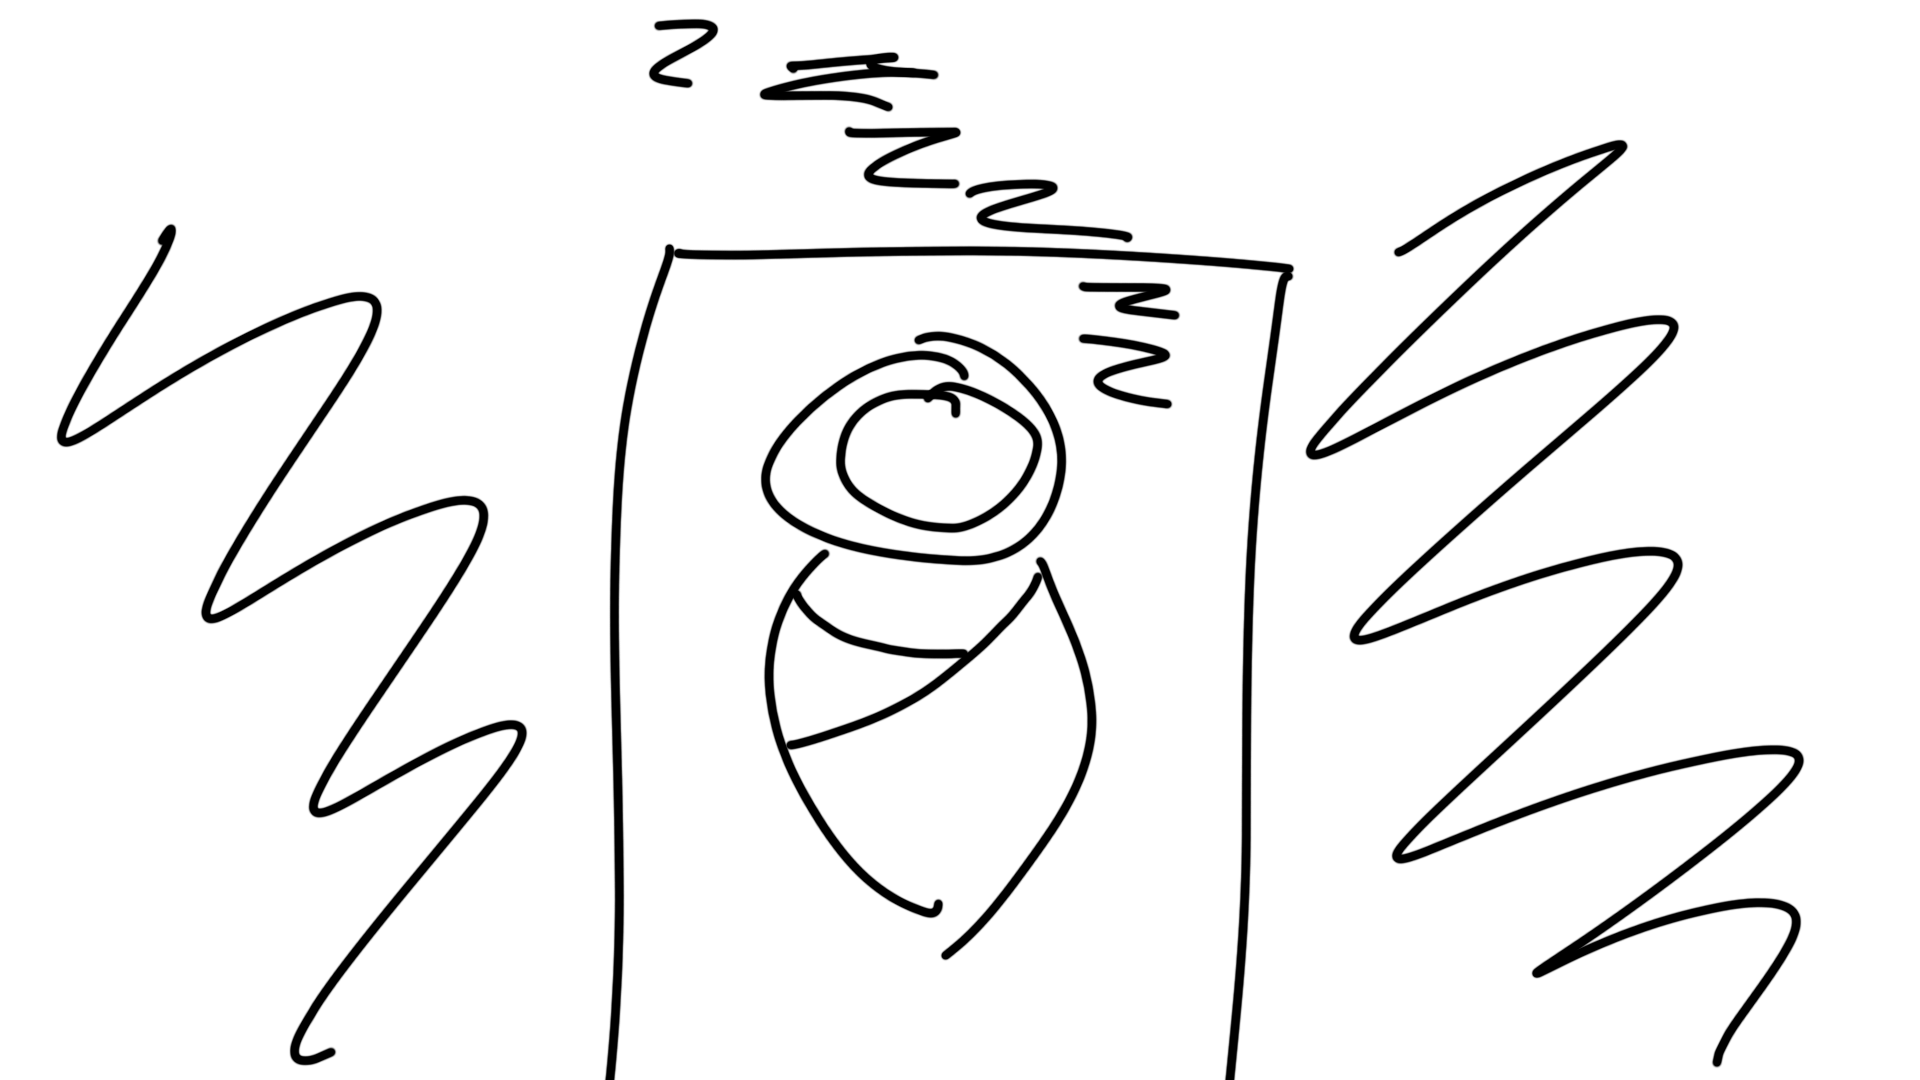 ANEW-Storyboard20.png